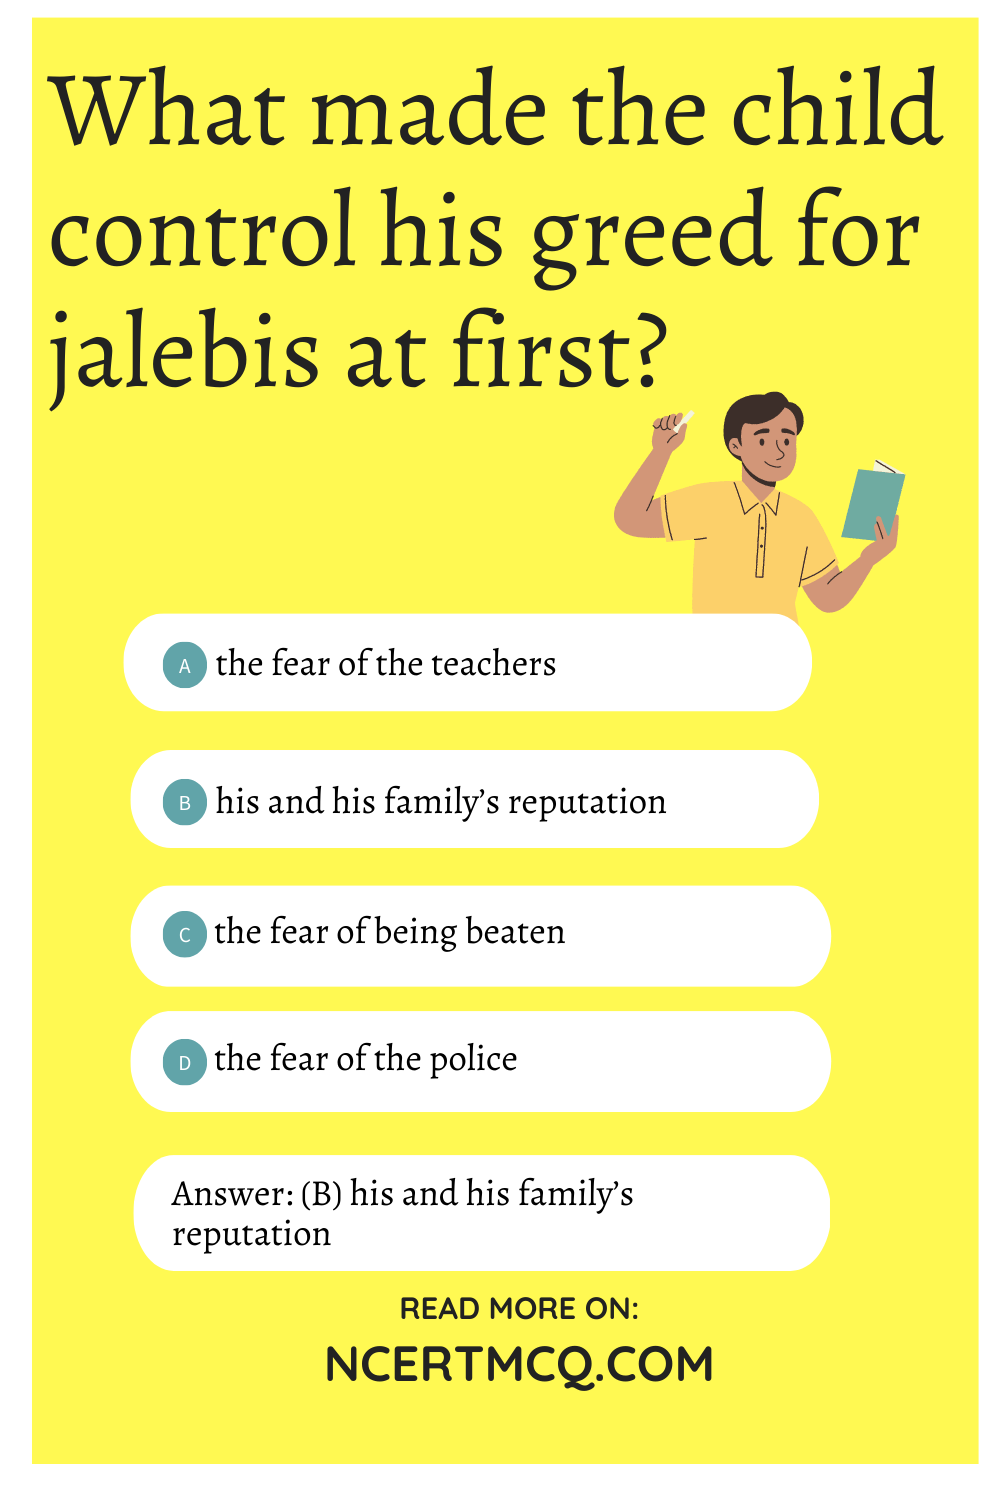 What made the child control his greed for jalebis at first?